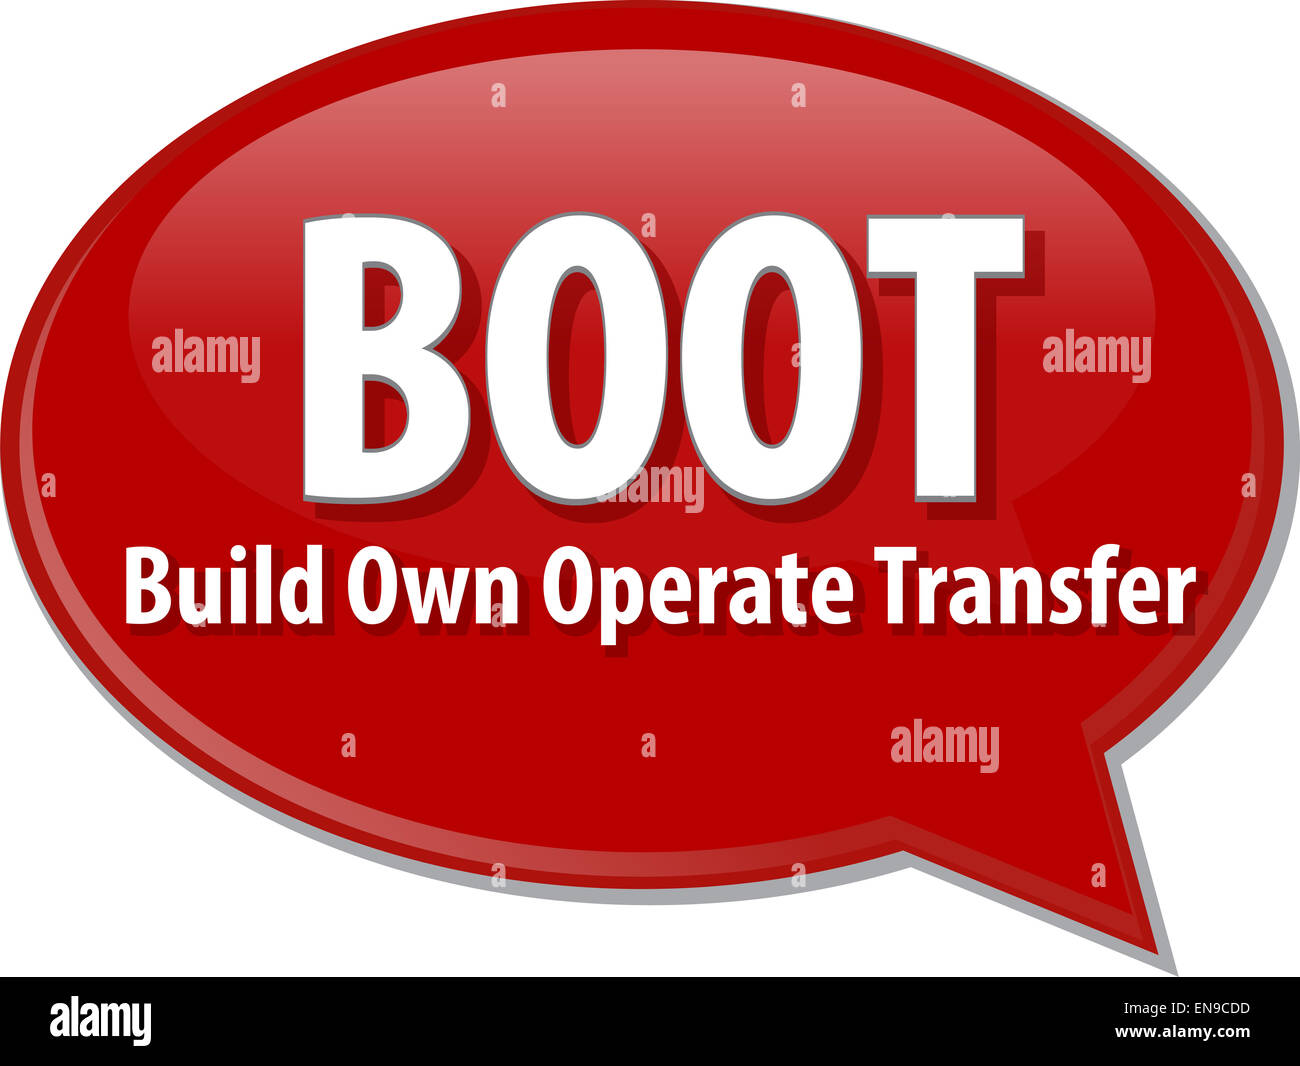 word speech bubble illustration of business acronym term BOOT Build Own Operate Transfer Stock Photo